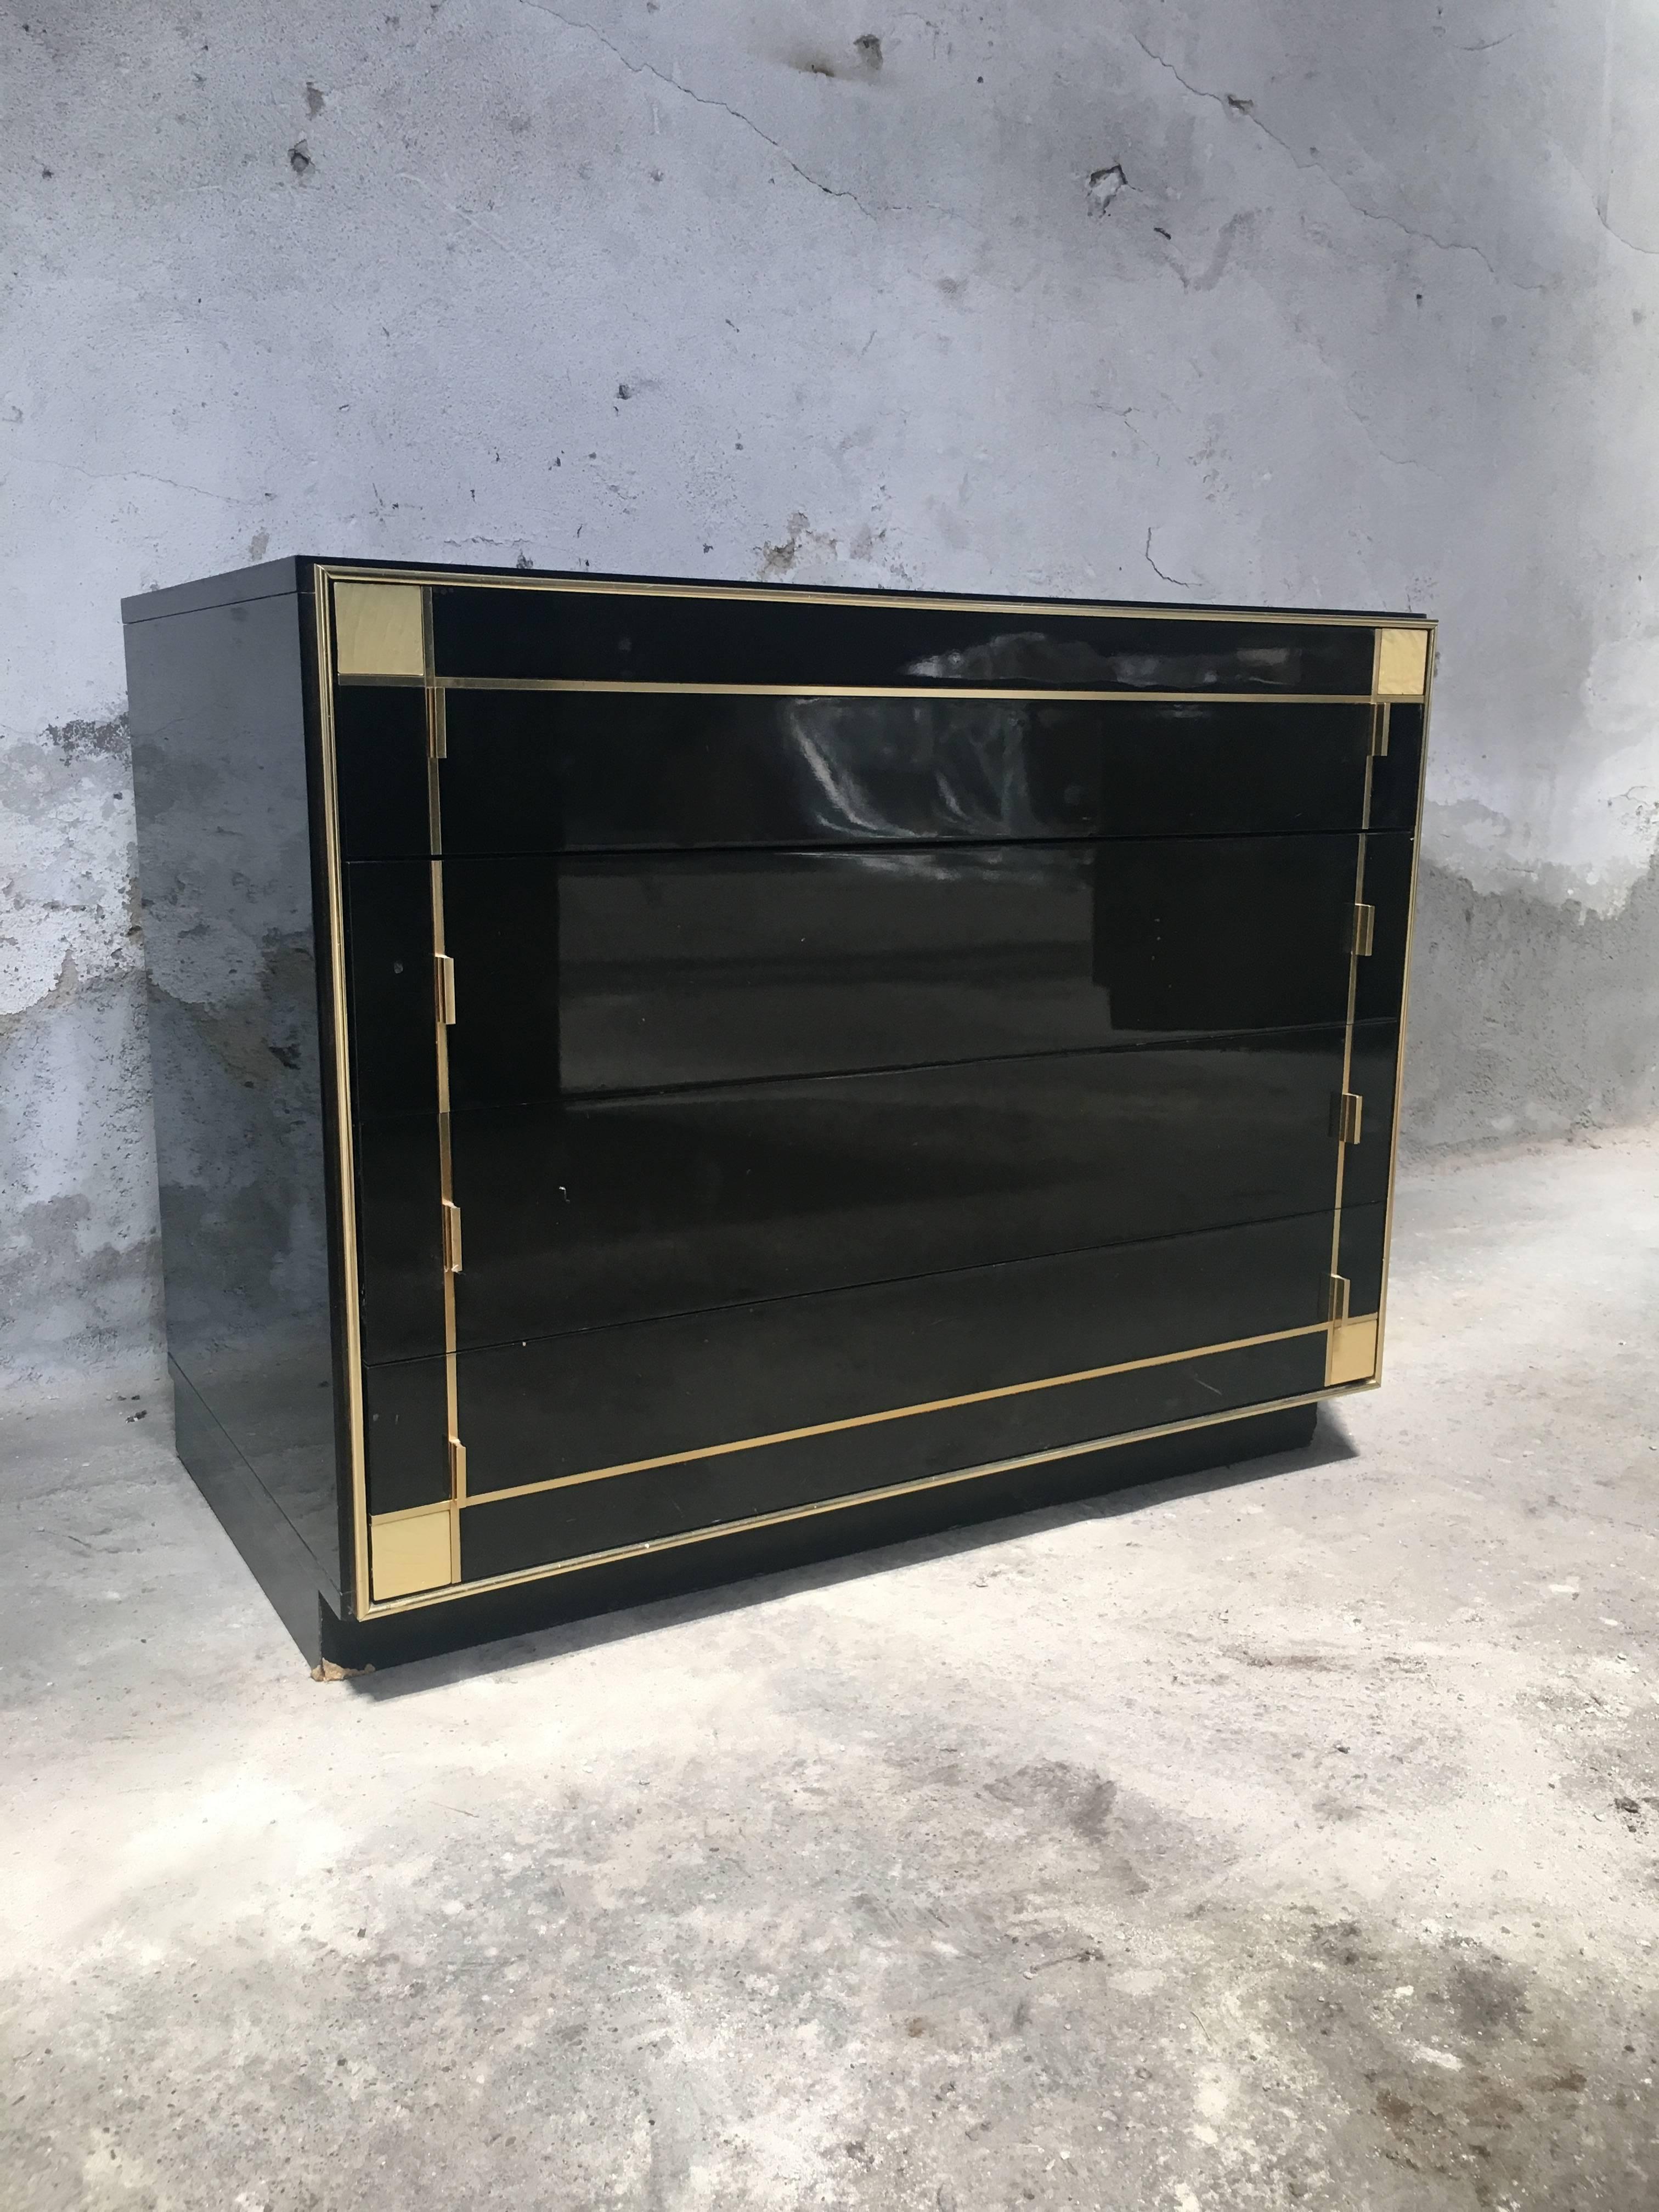 Italian 1970s black modernist dresser with brass and simile mother-of-pearl details.